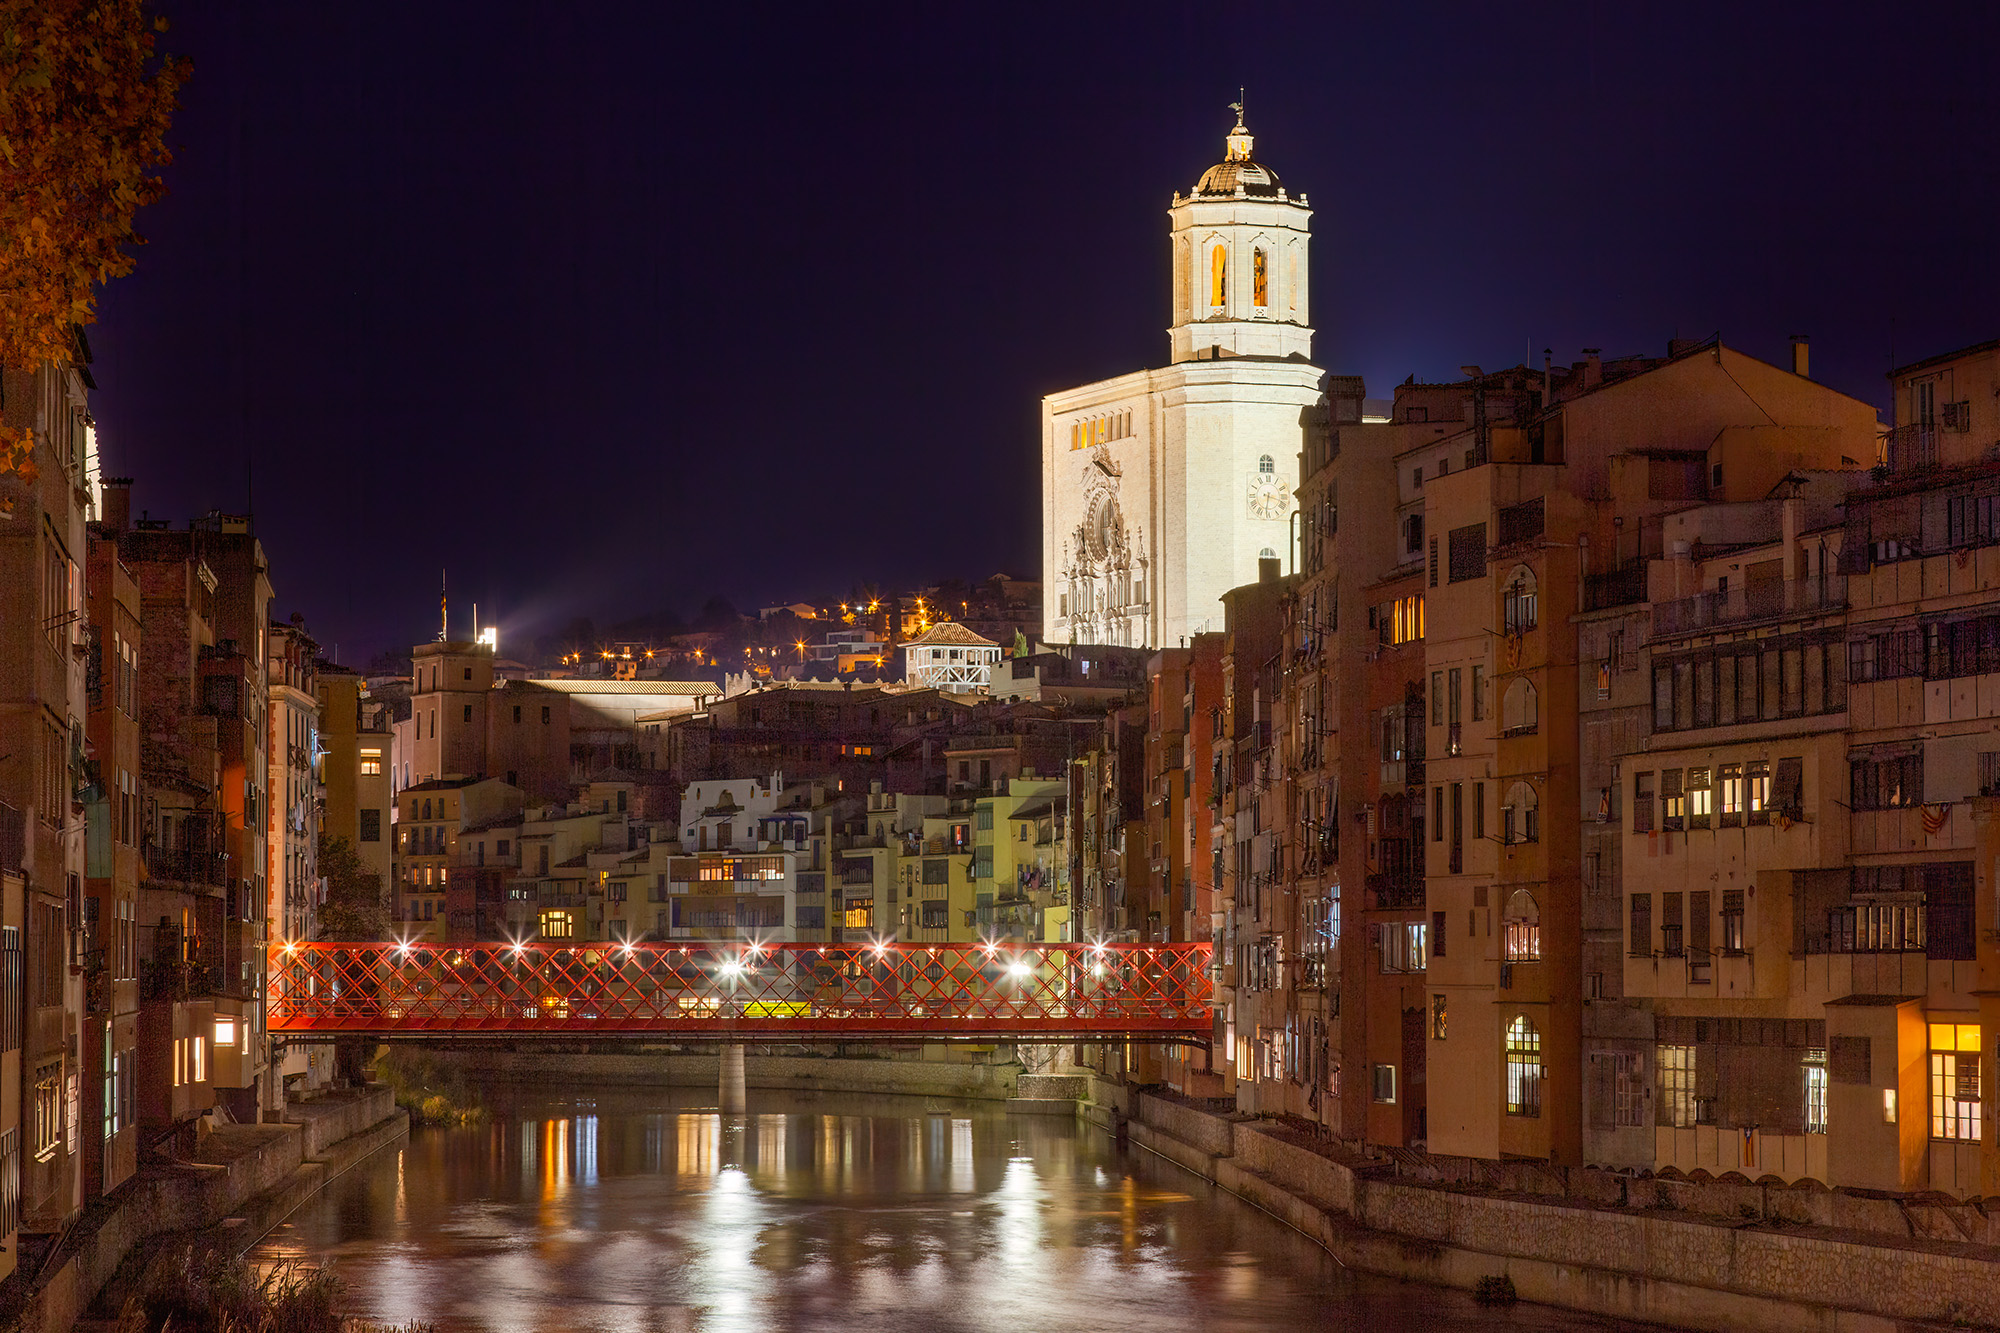 From a bridge in Girona, Spain, I captured a mesmerizing night scene. The illuminated Girona Cathedral, with its intricate fa...